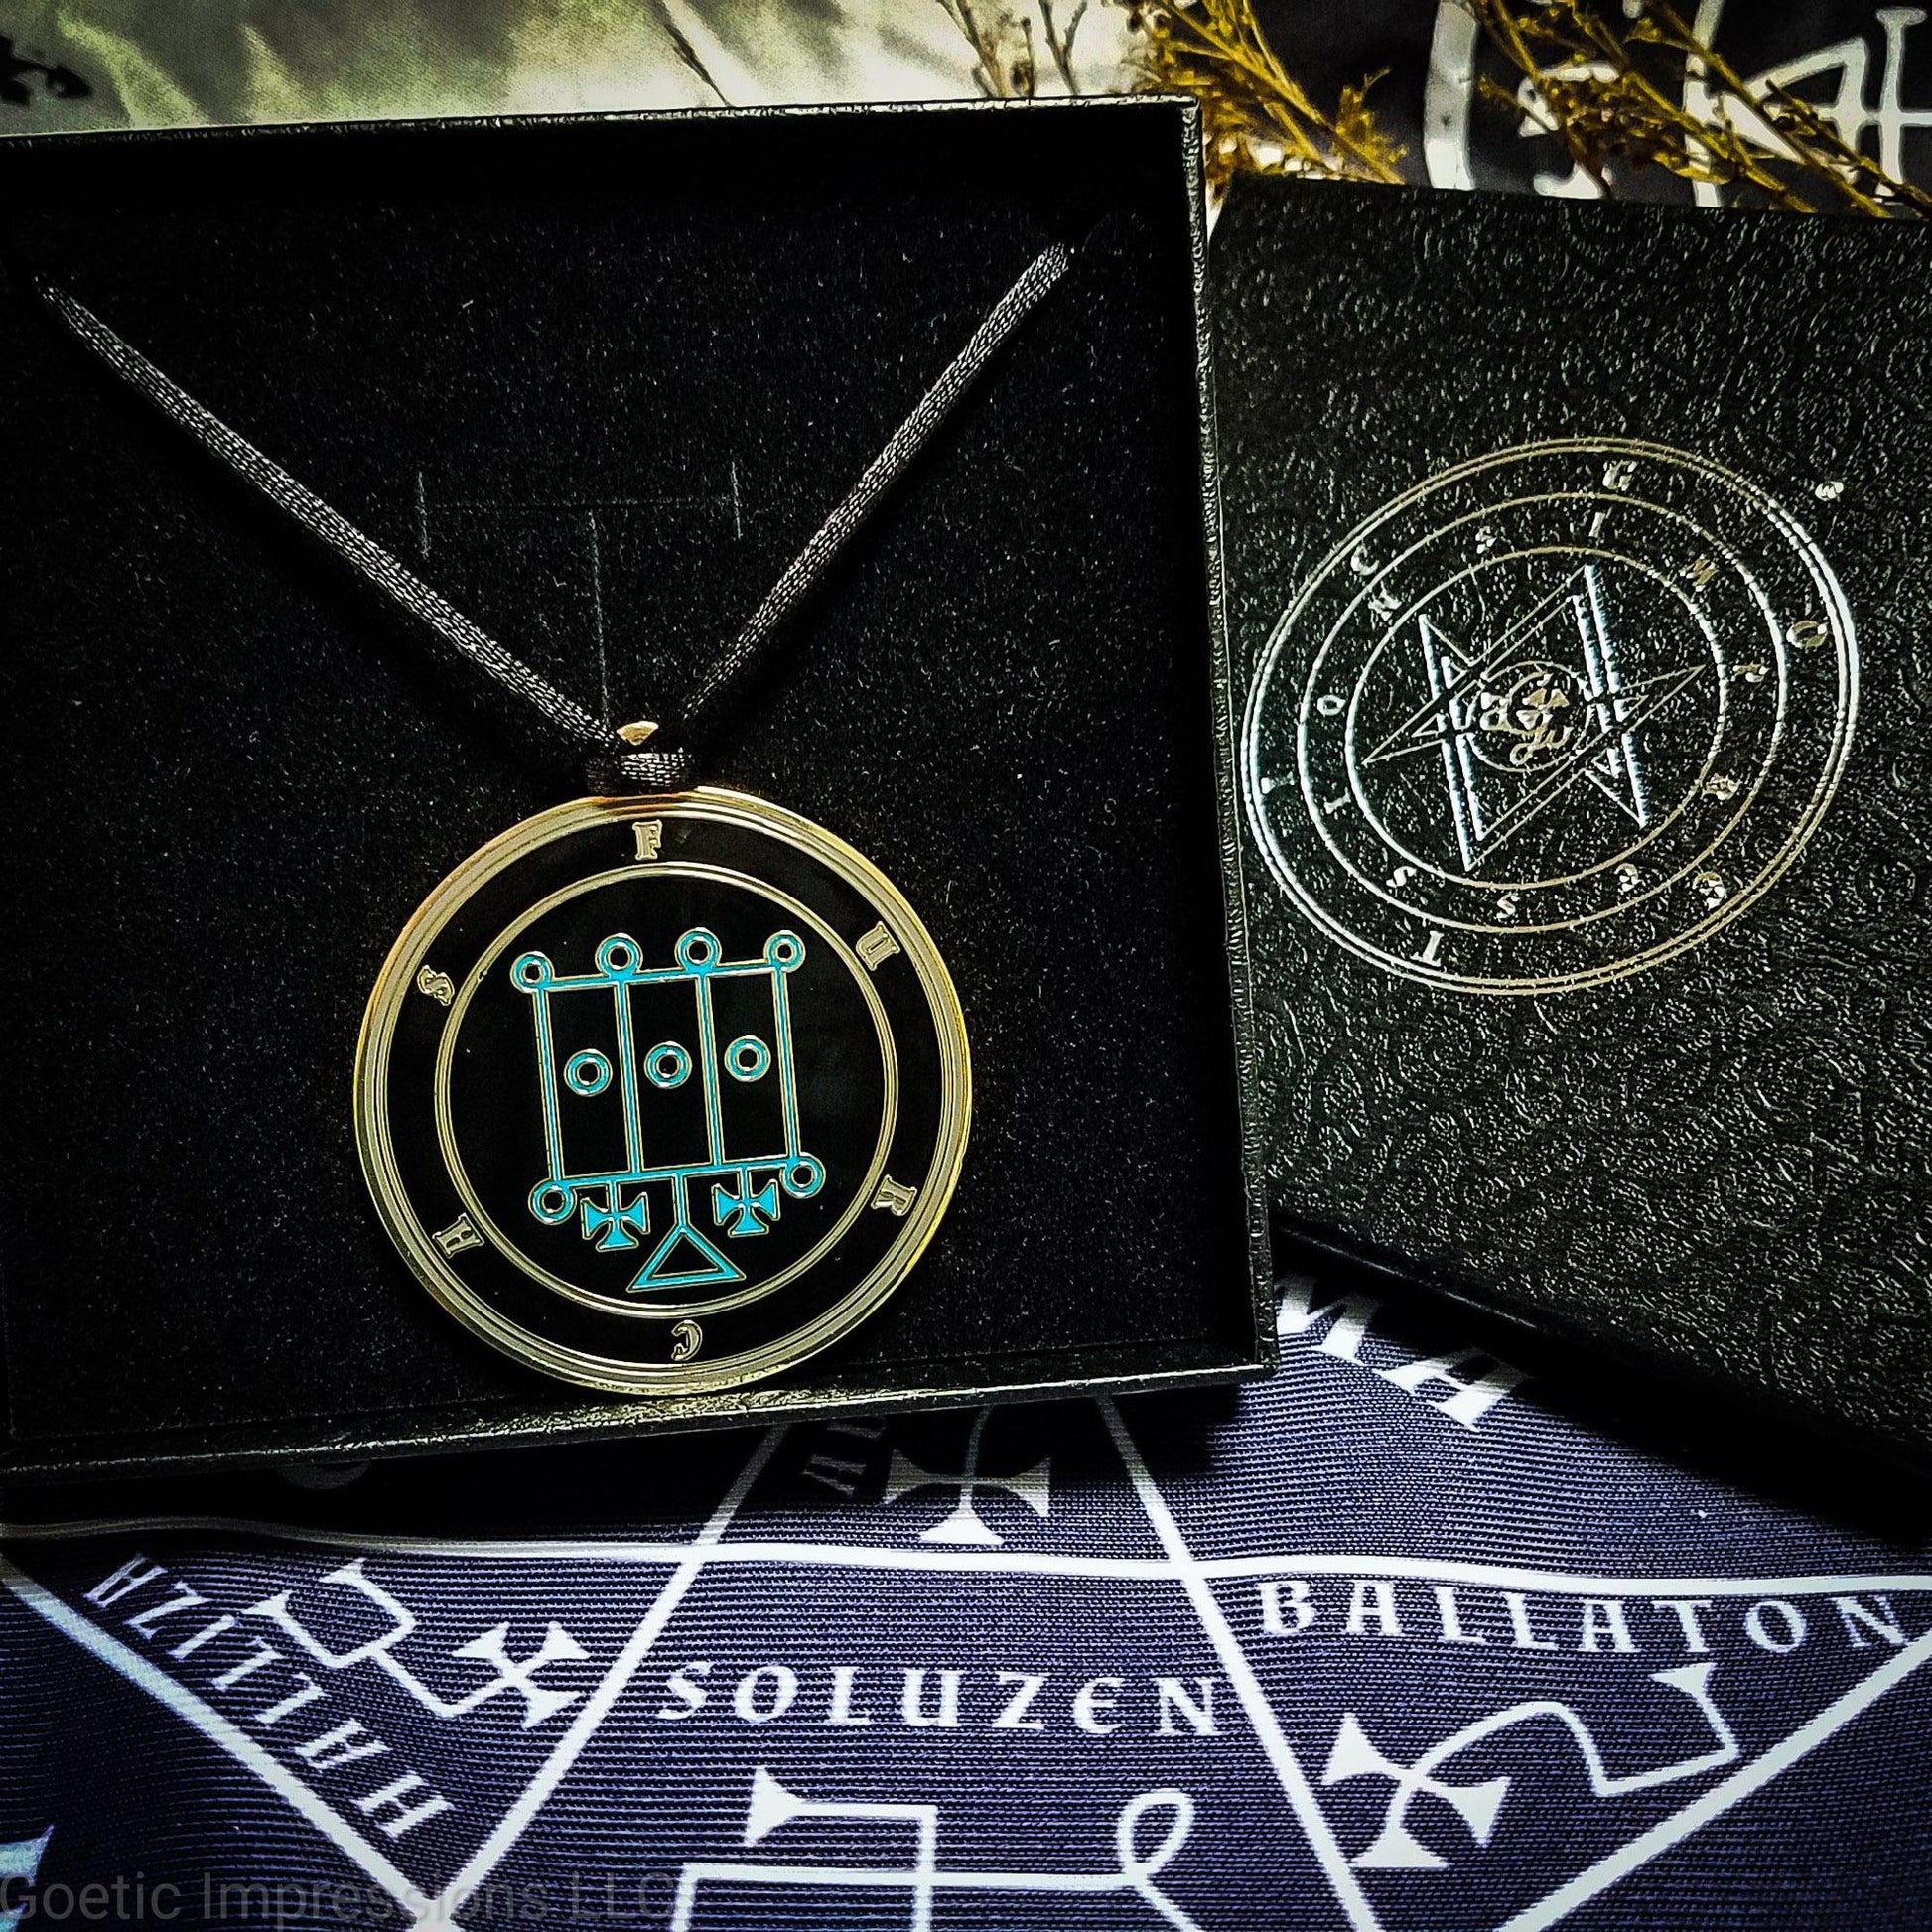 Necklace of Furcas in a Goetic Impressions gift box stamped in silver foil. The sigil for Furcas is blue. Furcas's name is surrounding the sigil with concentric circles in gray on a black background. The seal is brass plated. The box is on a purple altar cloth with the Tetragrammaton in white.